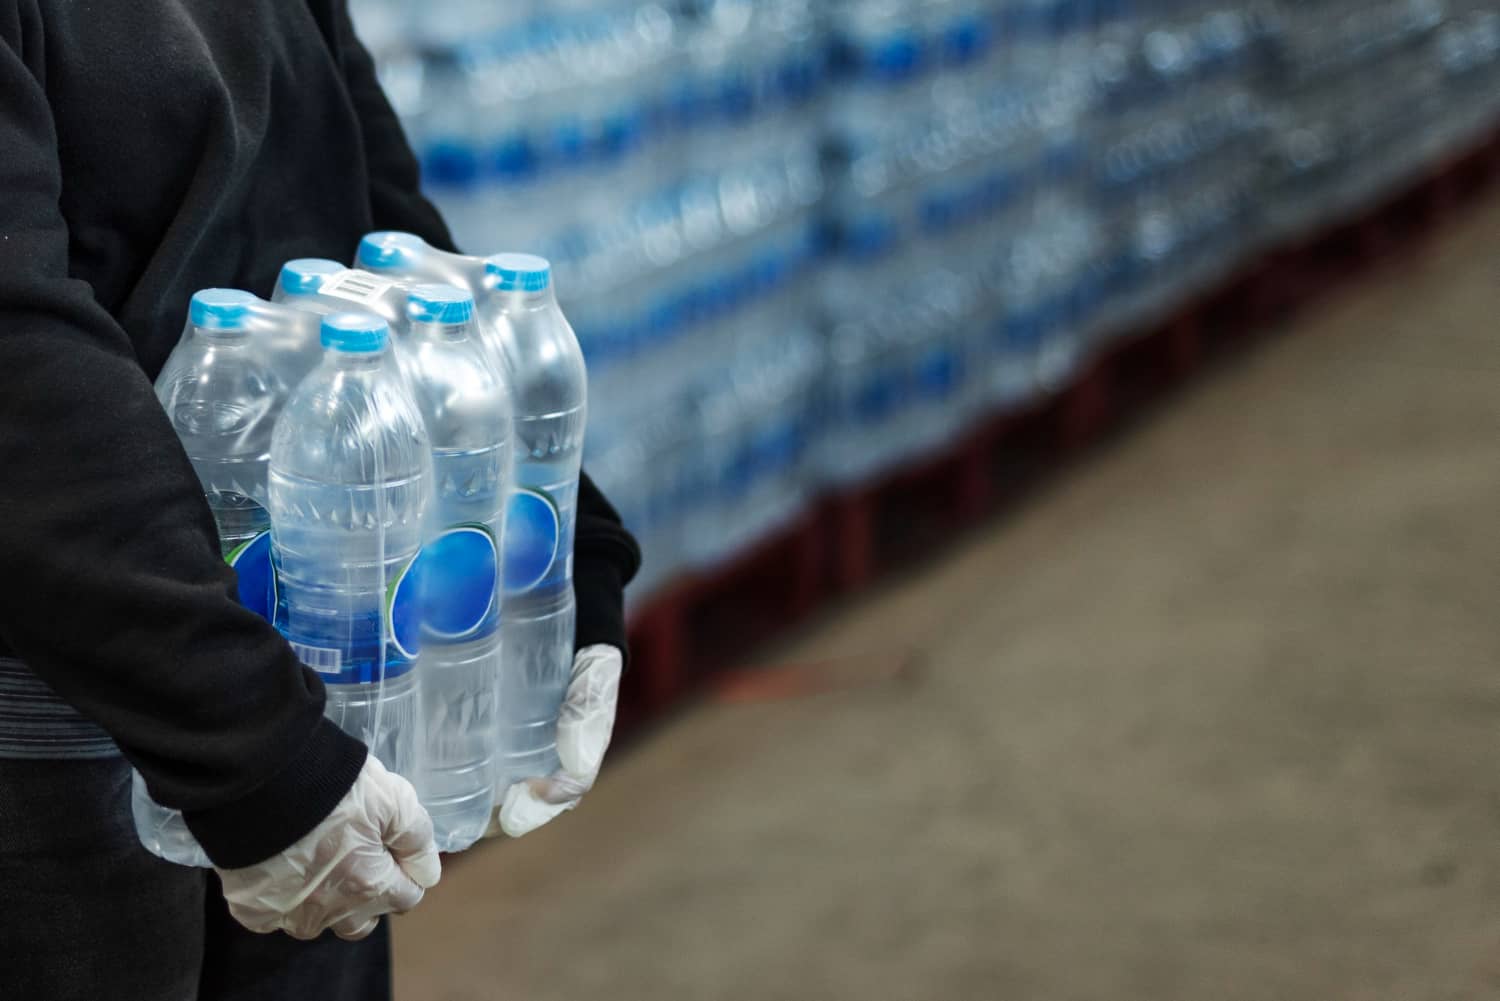 Thousands of plastic nanoparticles discovered in bottled water bottles